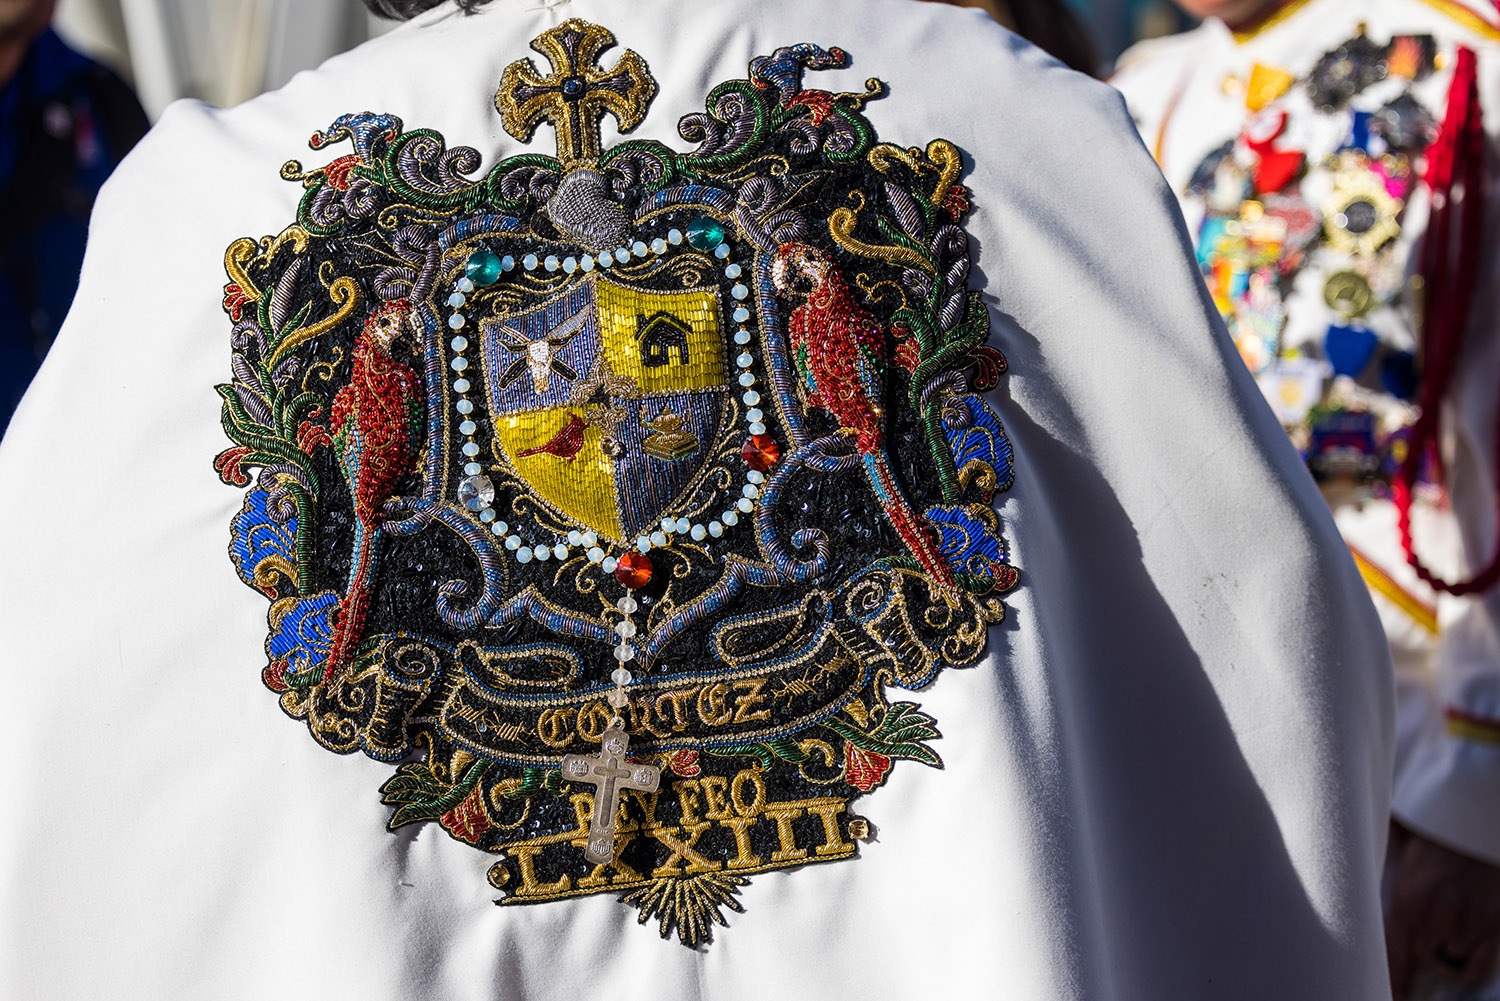 Intricate patchwork detailing Rey Feo LXXIII Augustine Cortez, Jr.’s cape can be seen during Fiesta Fiesta at Hemisfair, San Antonio, TX, on Thursday, March 31, 2022. Photo by Chris Stokes | Heron contributor